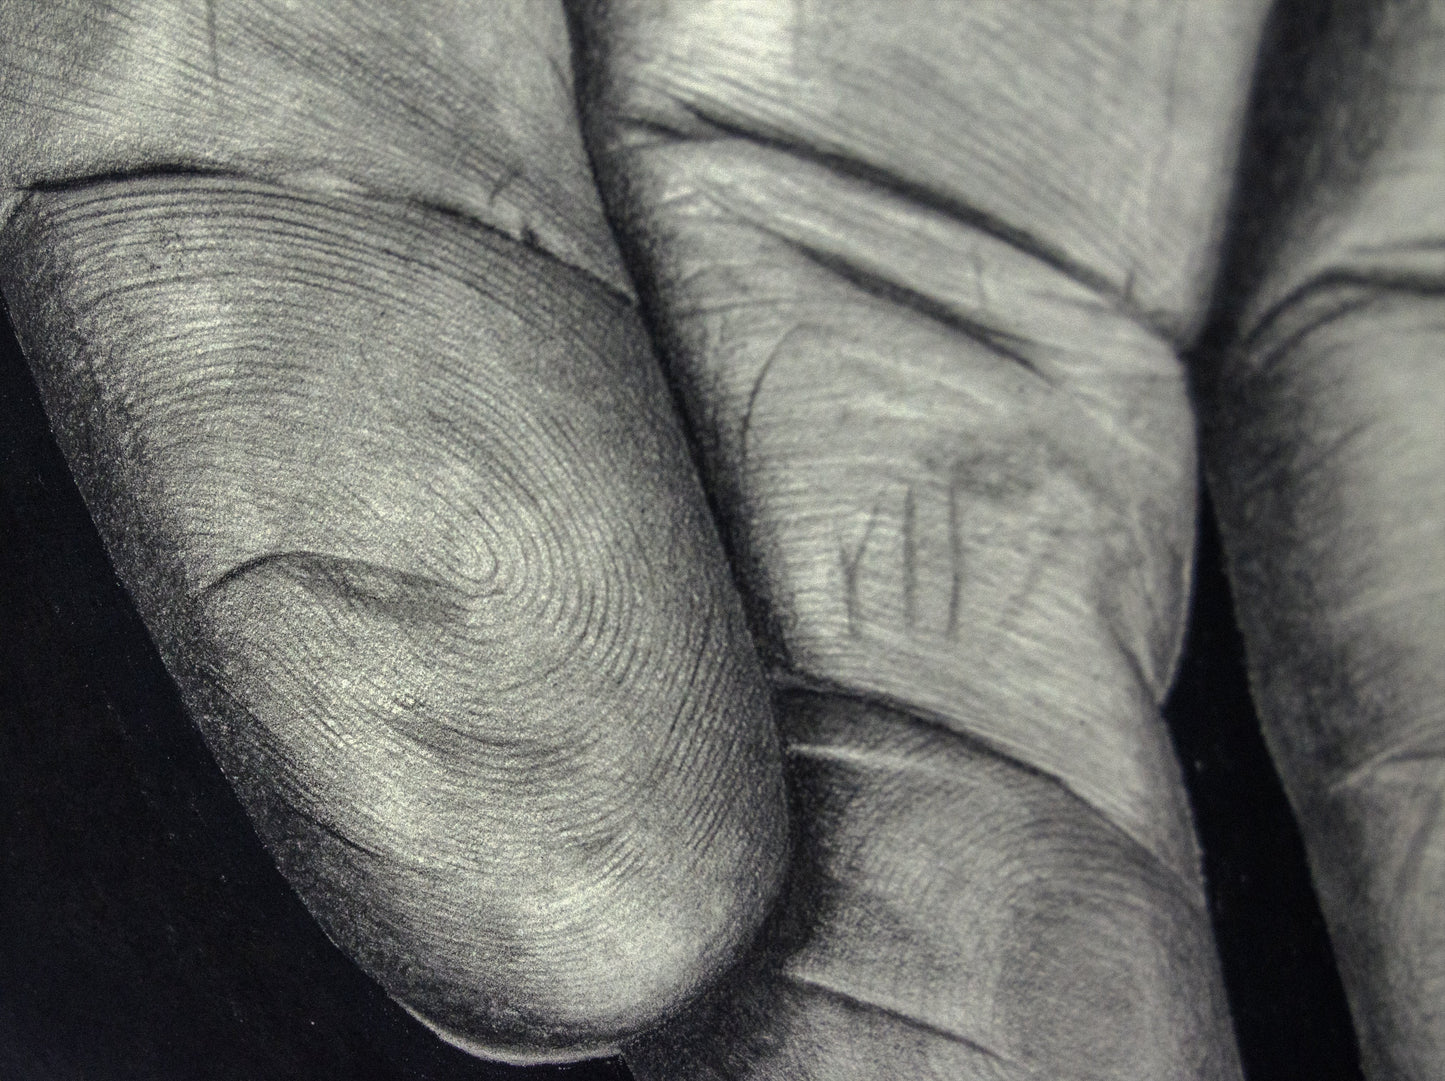 Untitled (Hand 2) 2020 graphite and charcoal on archival